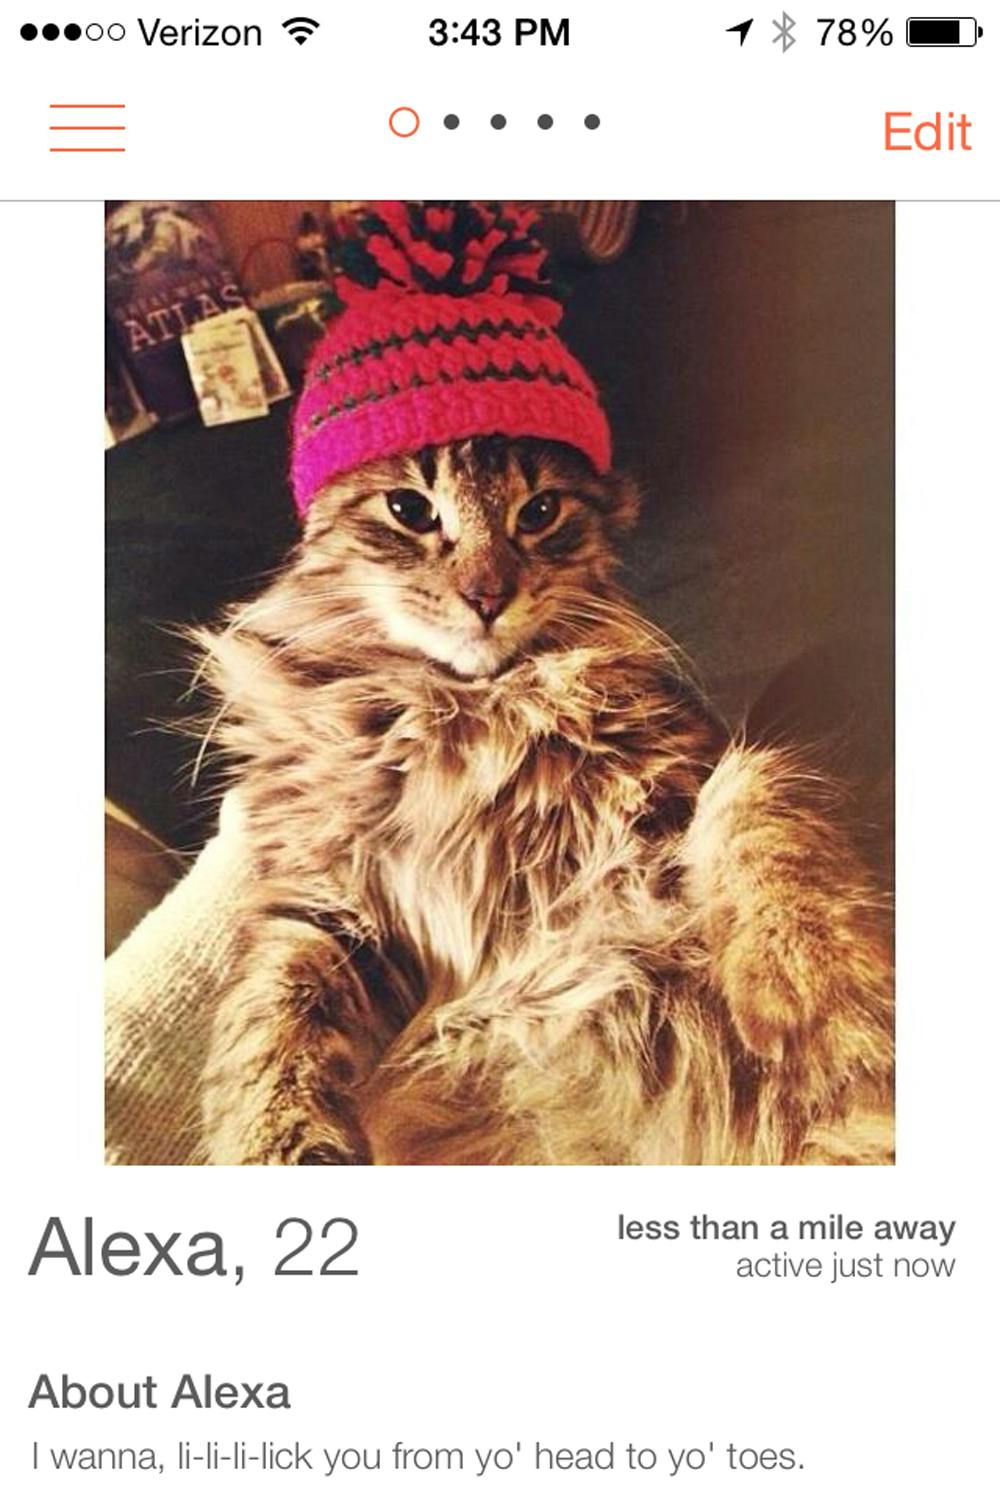 <p class="p1"><span class="s1">Tinder is a dating app that lets two people strike up a conversation after mutually finding each other attractive. Avenue writer Alexa Volland's kitten Santa Paws, pictured above, had 222 matches in the span of two days.</span></p>